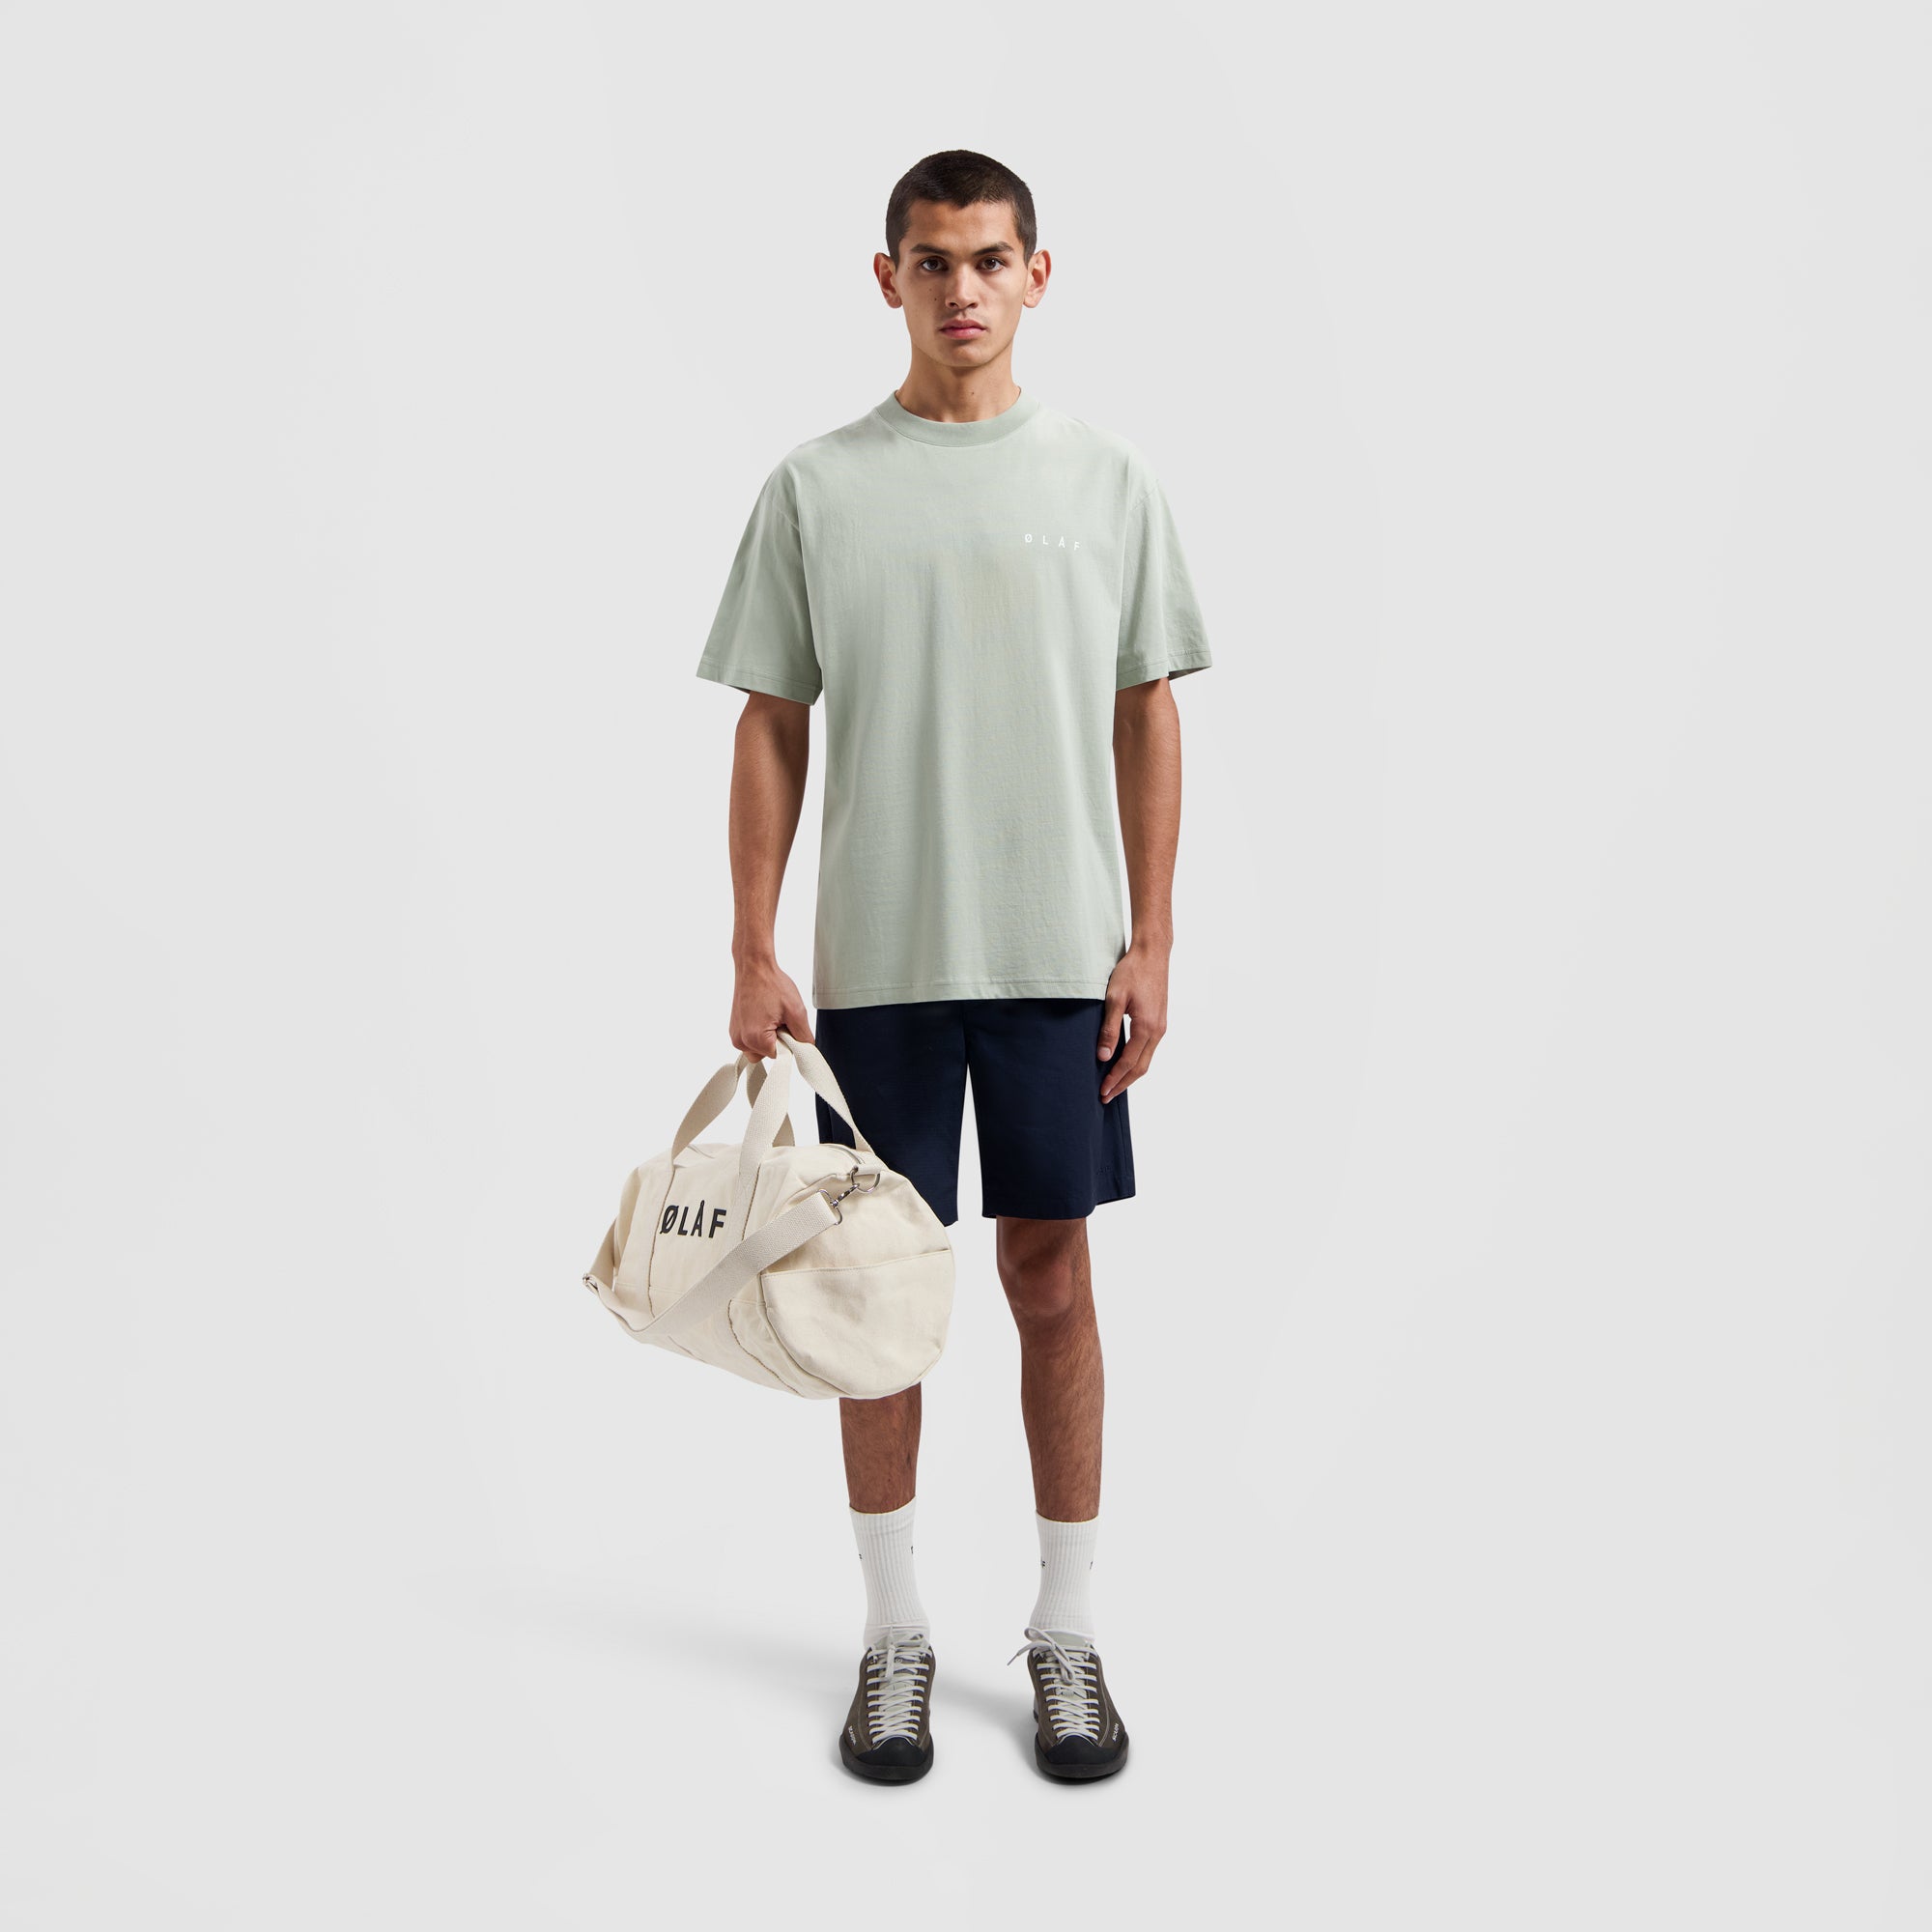 Pixelated Face Tee - Pale Green